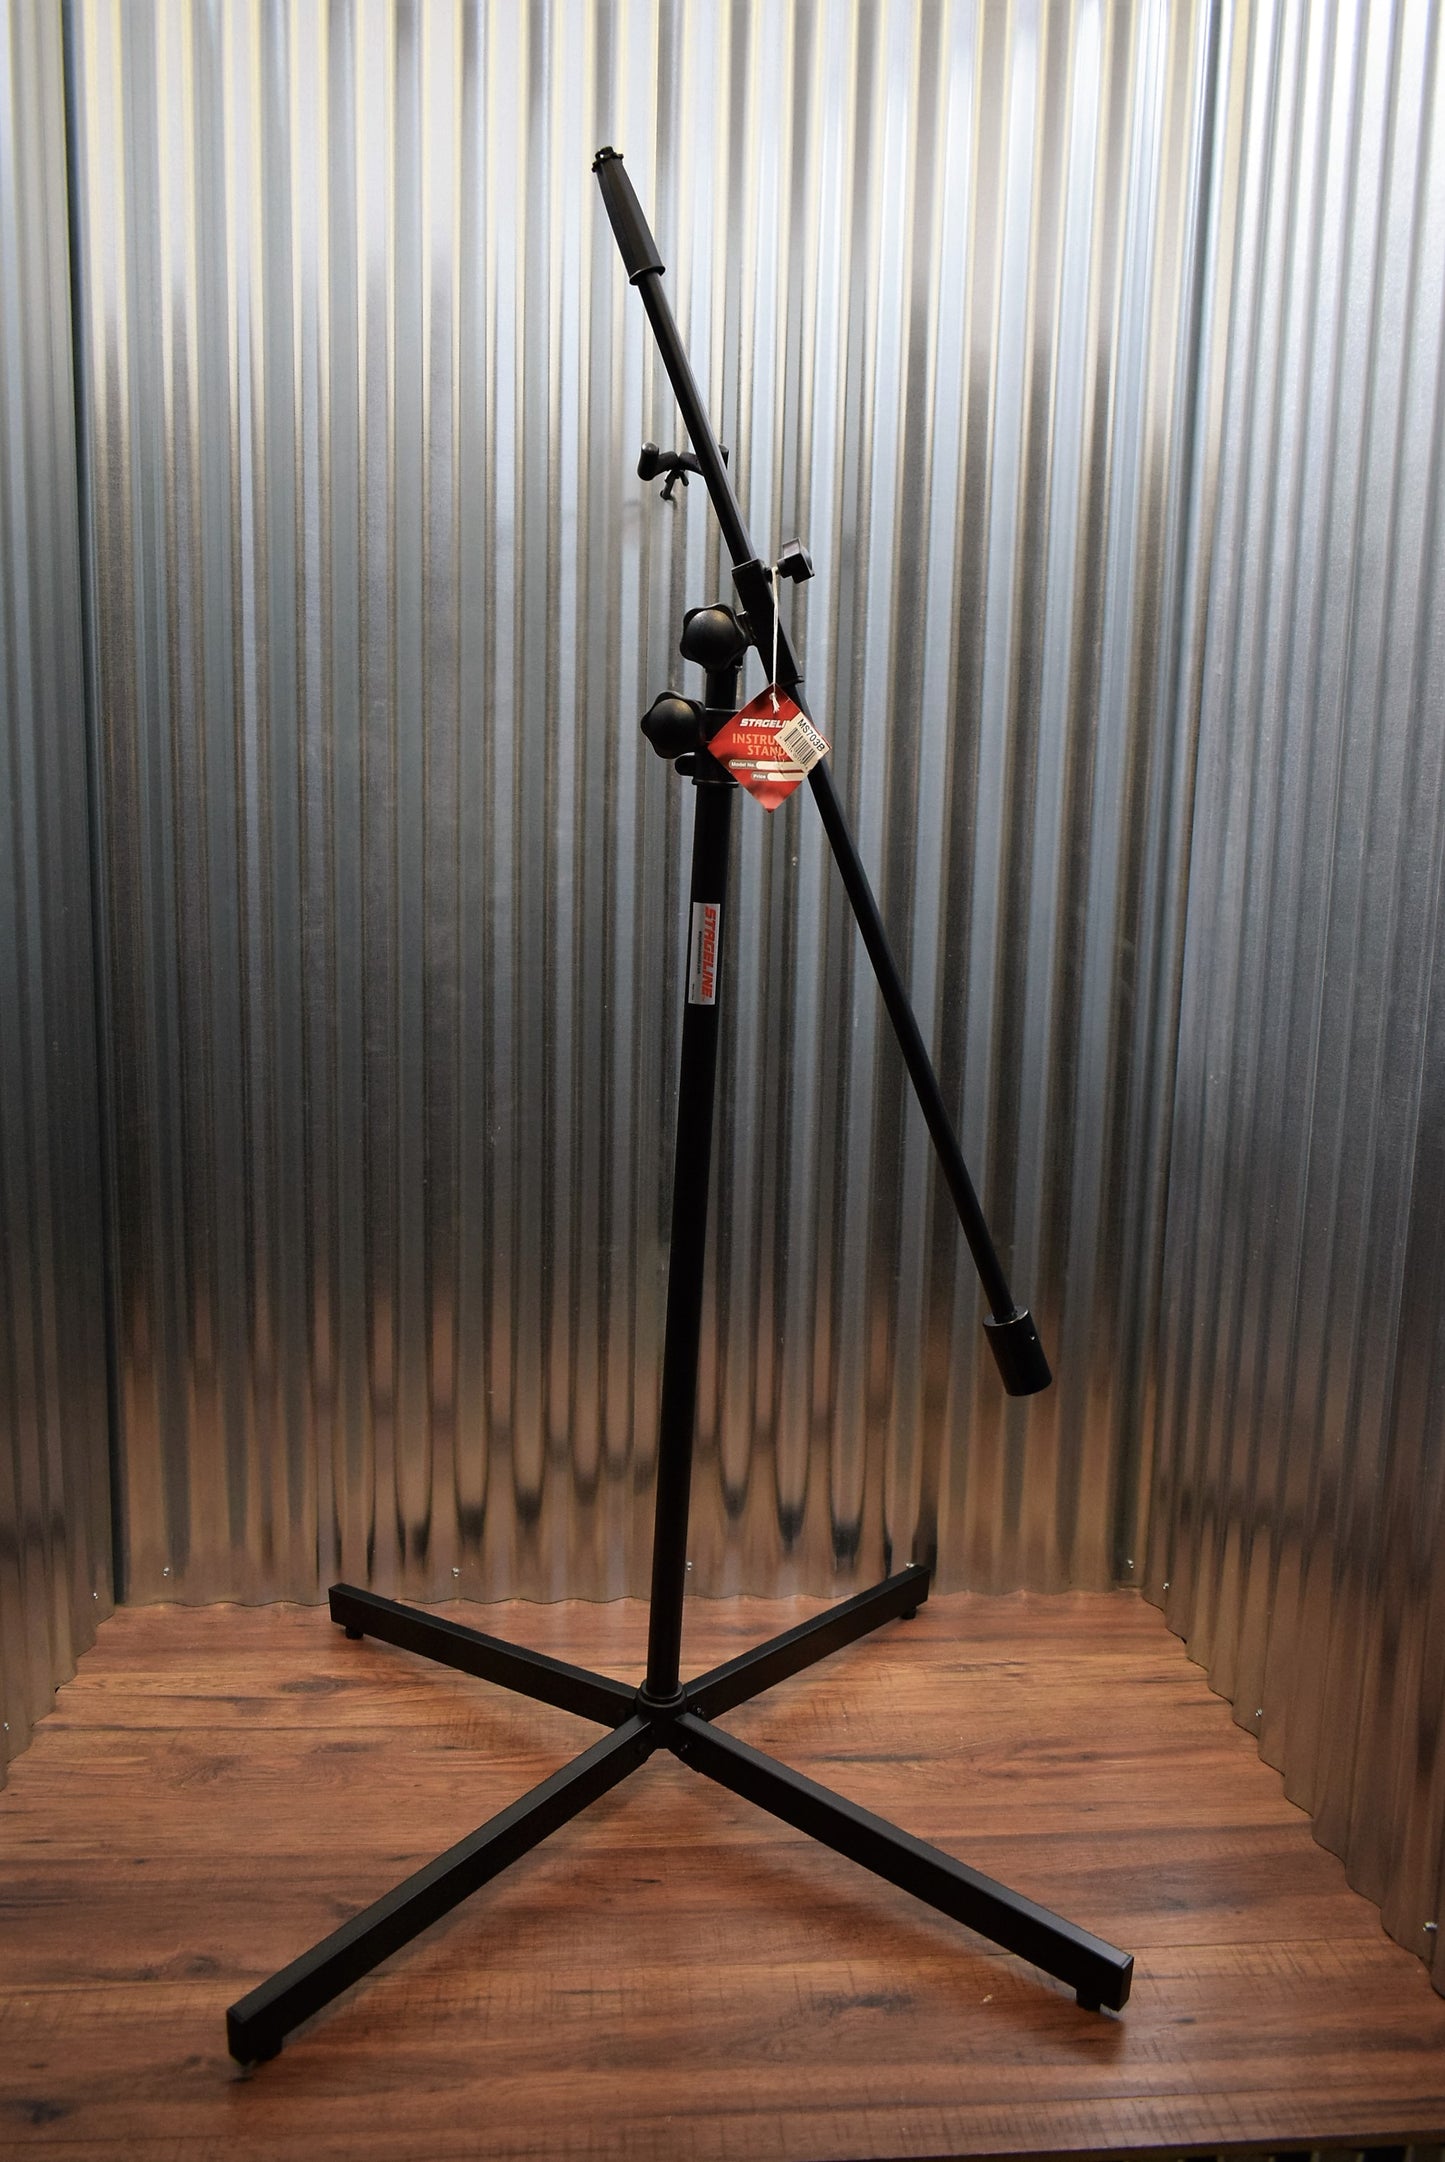 Stageline Stands MS703B Professional Studio Boom Microphone Stand Black Used